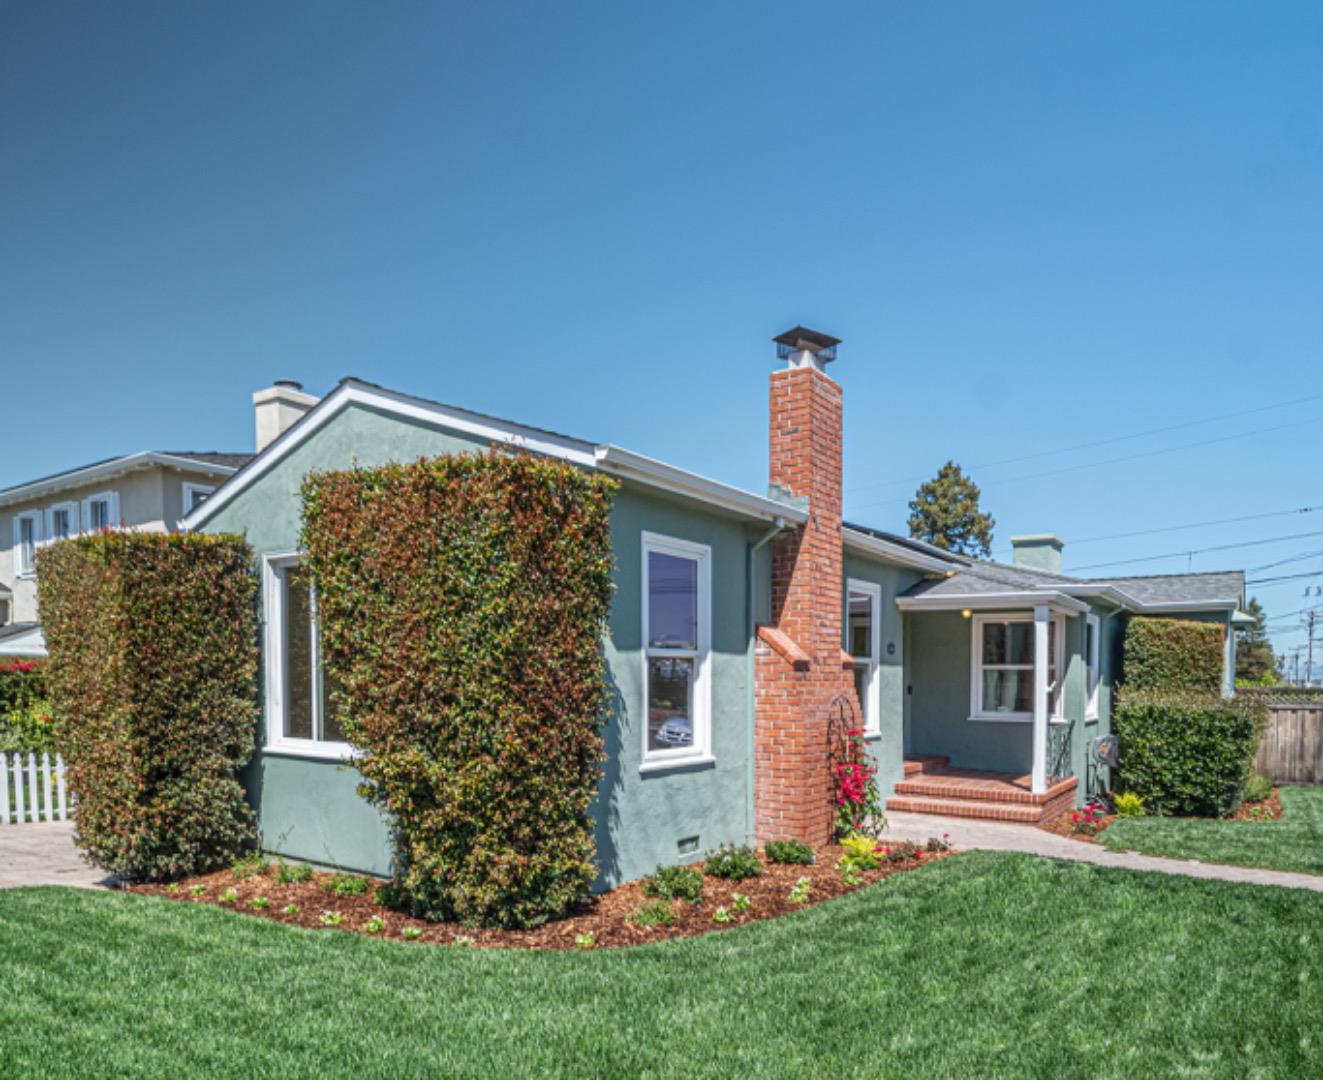 Photo of 276 37th Ave in San Mateo, CA